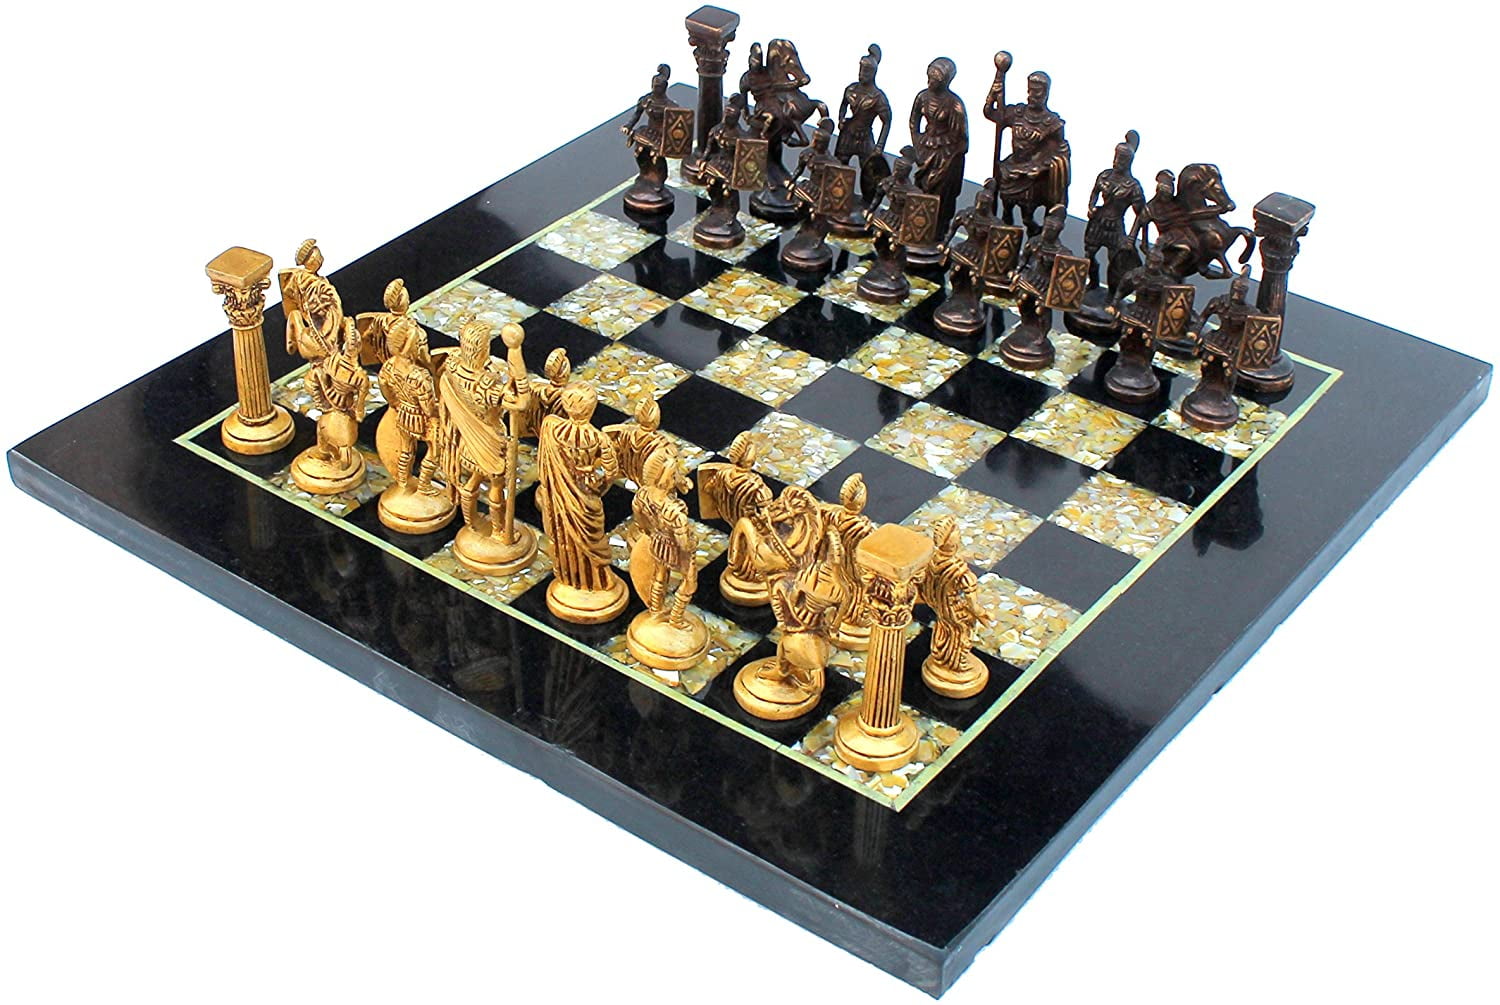 14" Wooden Flat Chess Board "Black Marble" 